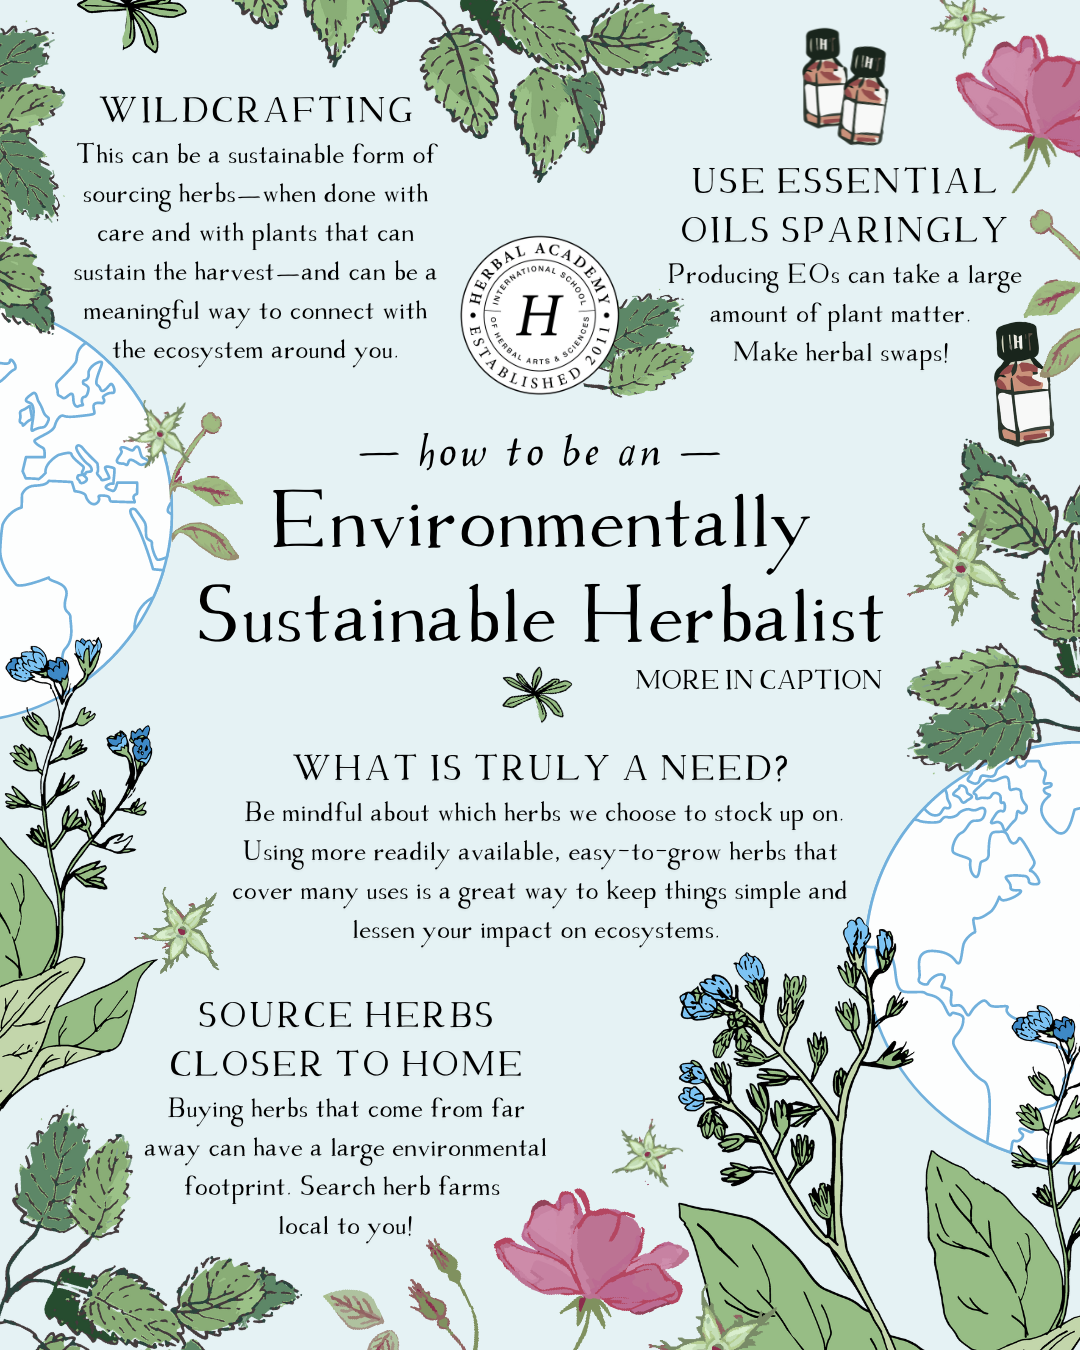 How to be an environmentally sustainable herbalist